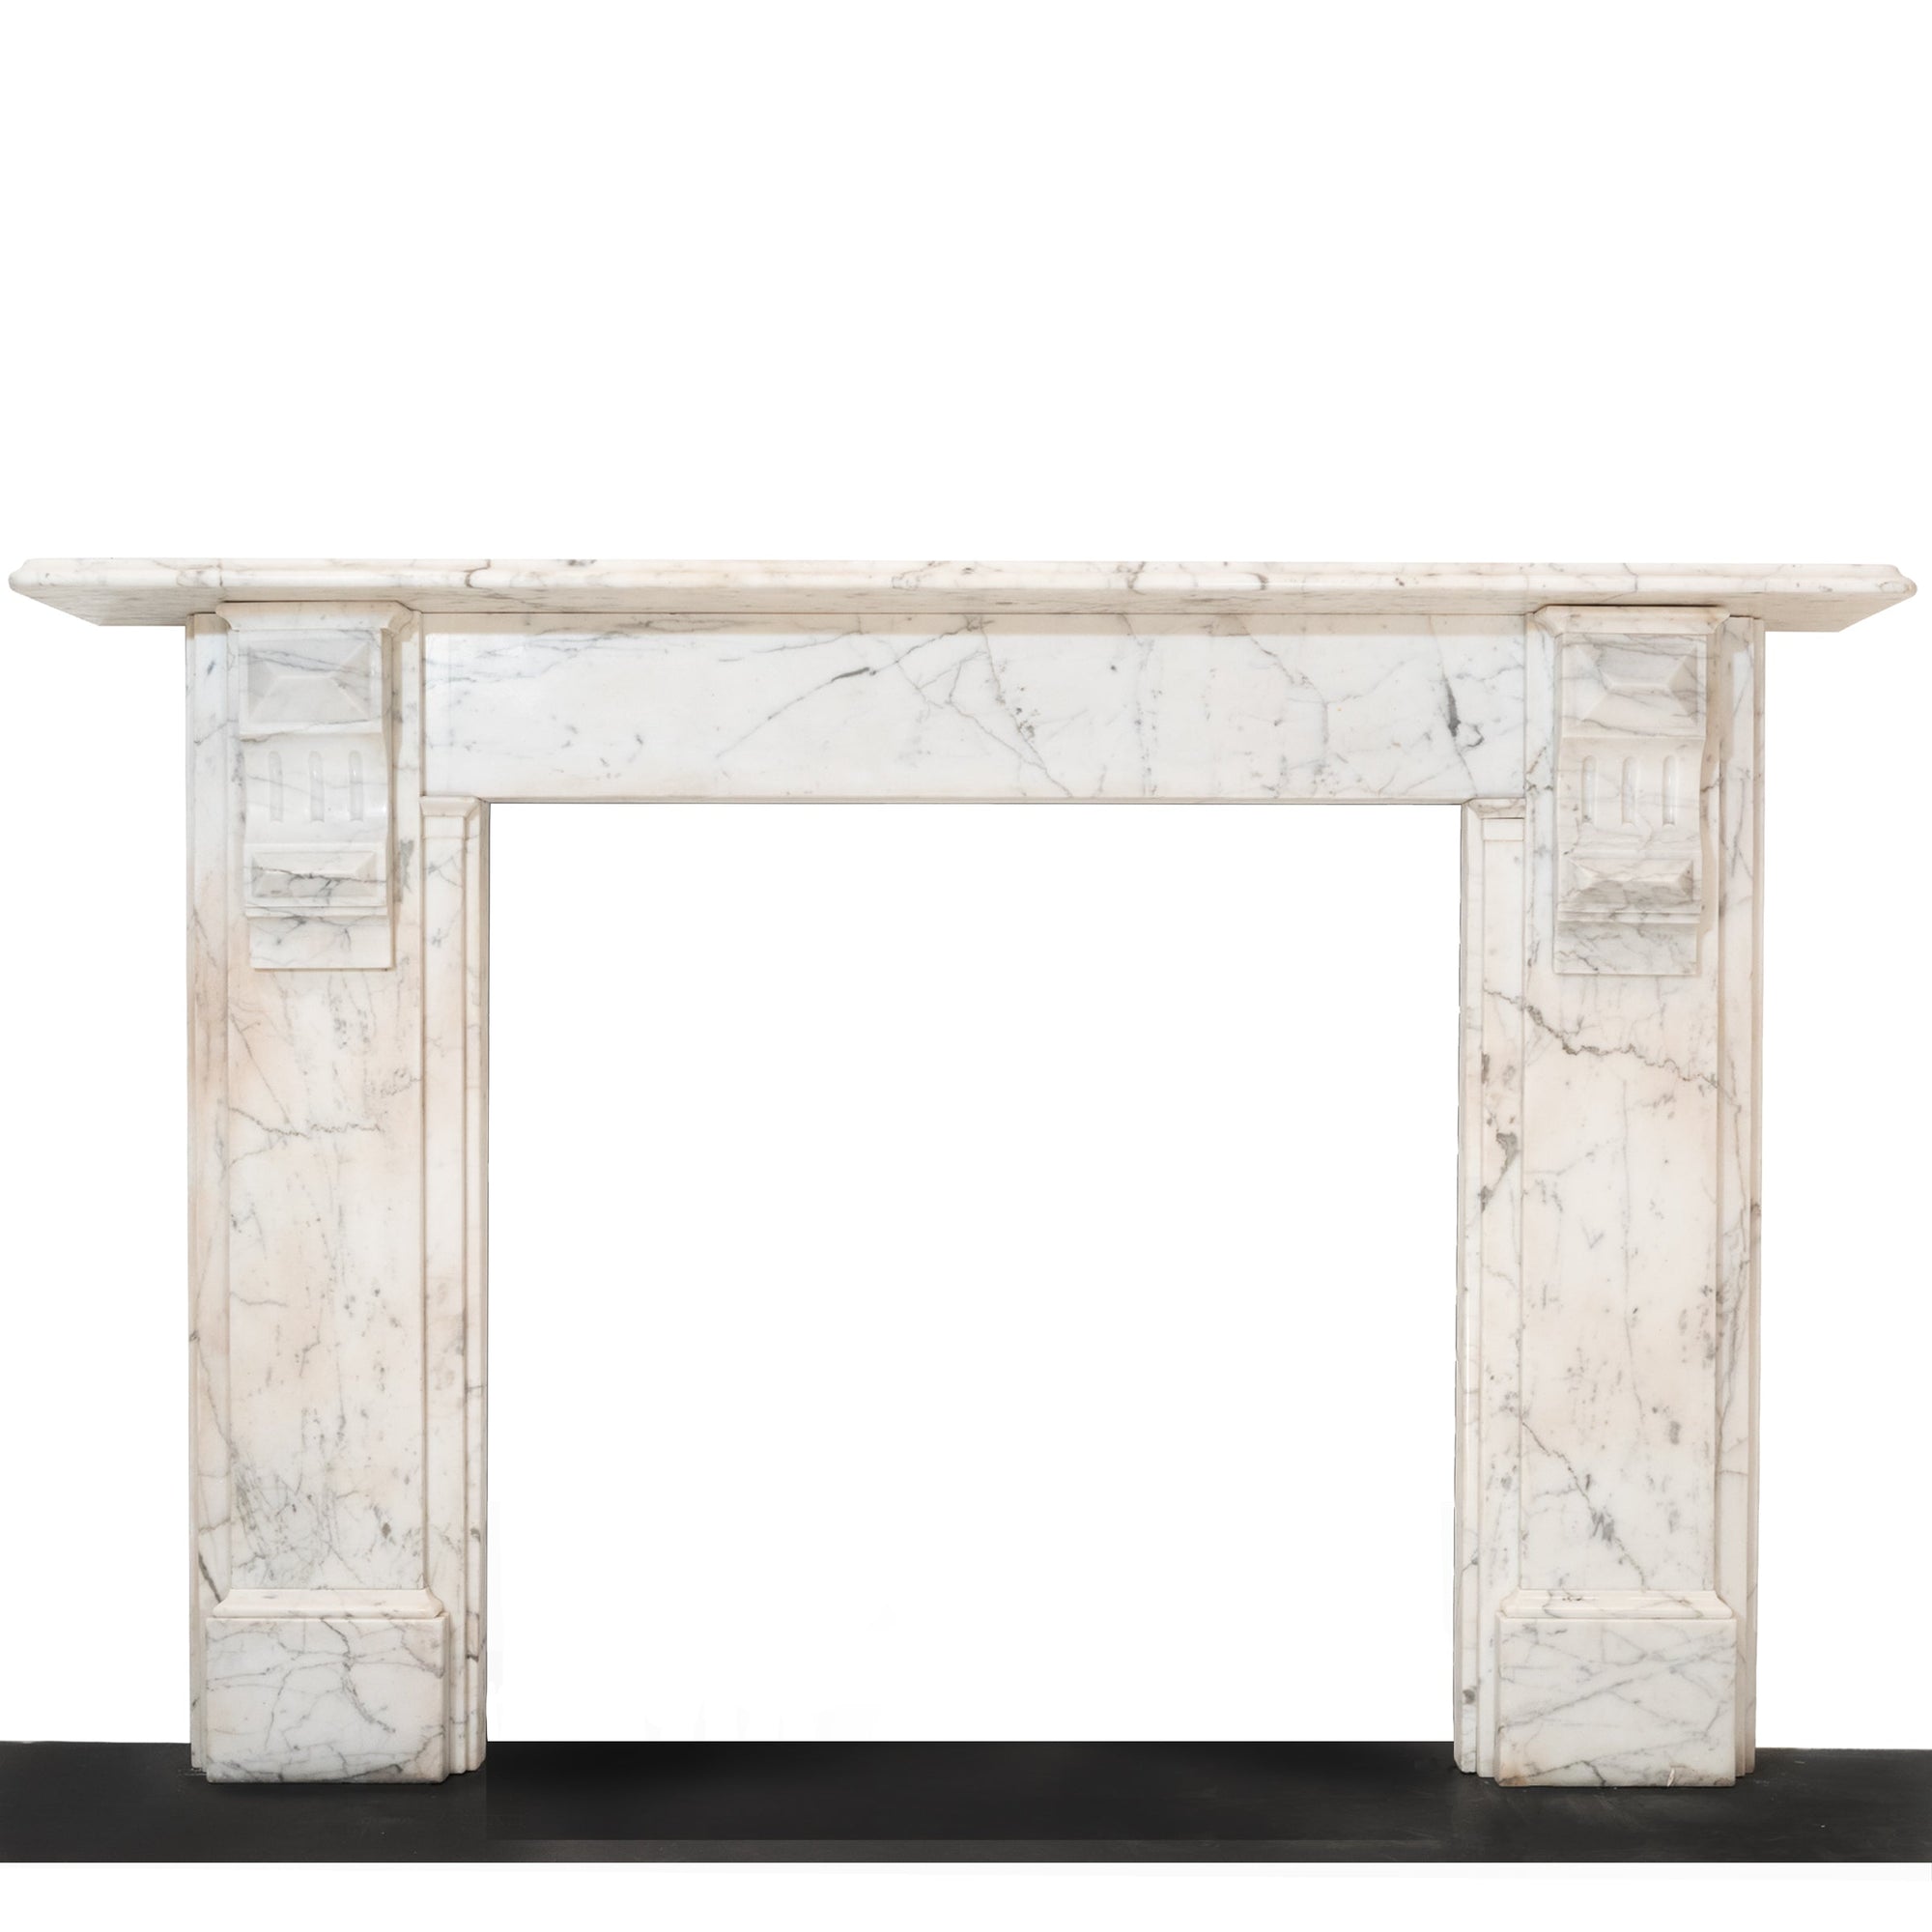 Antique Carrara Marble Fireplace Surround with Corbels (Pair Available) | The Architectural Forum